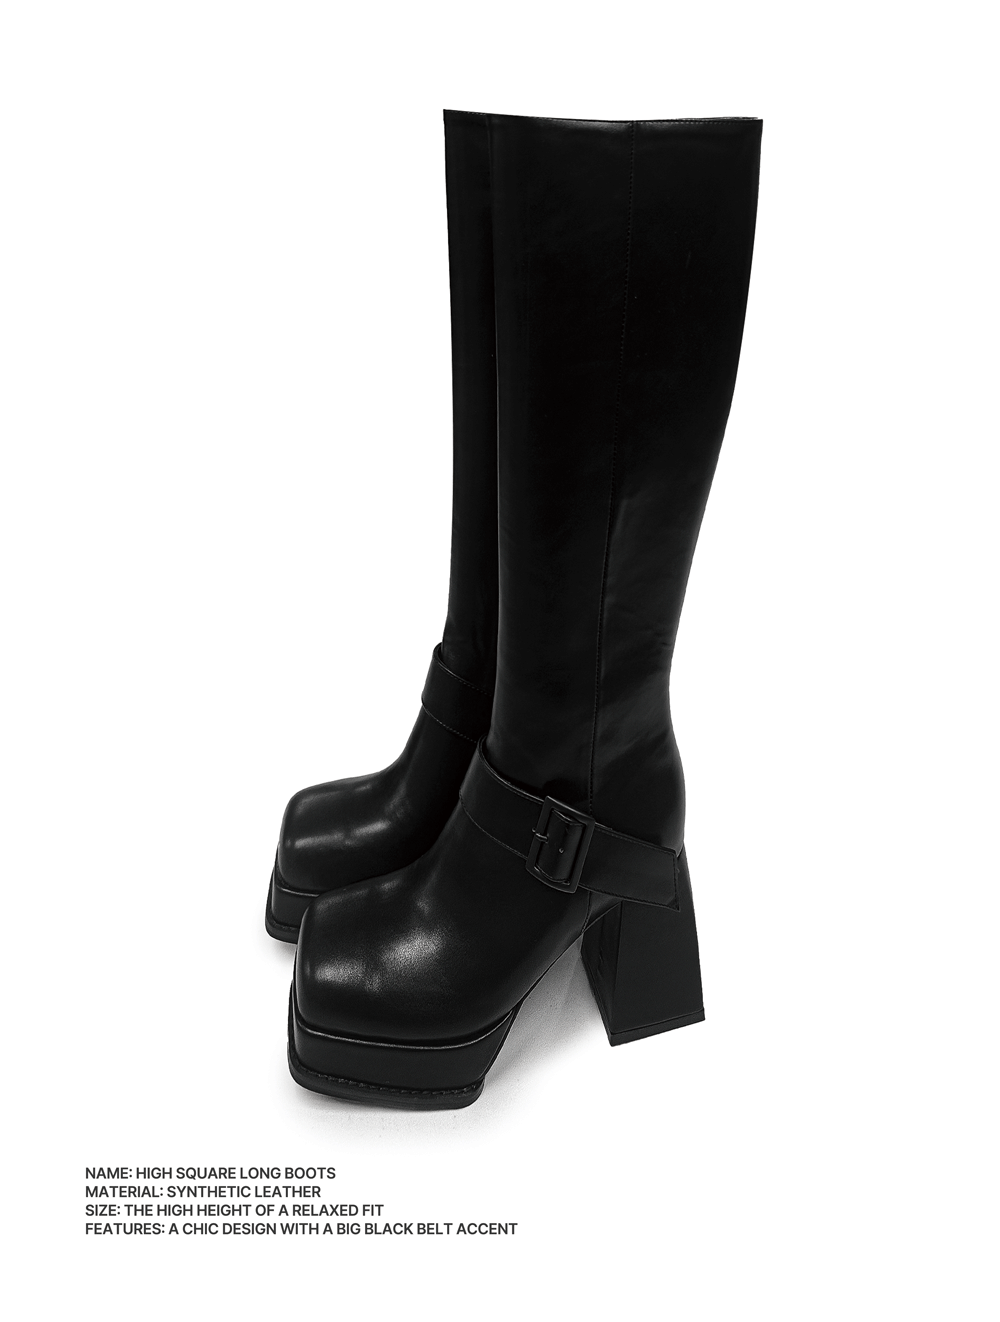 High Square Long Boots